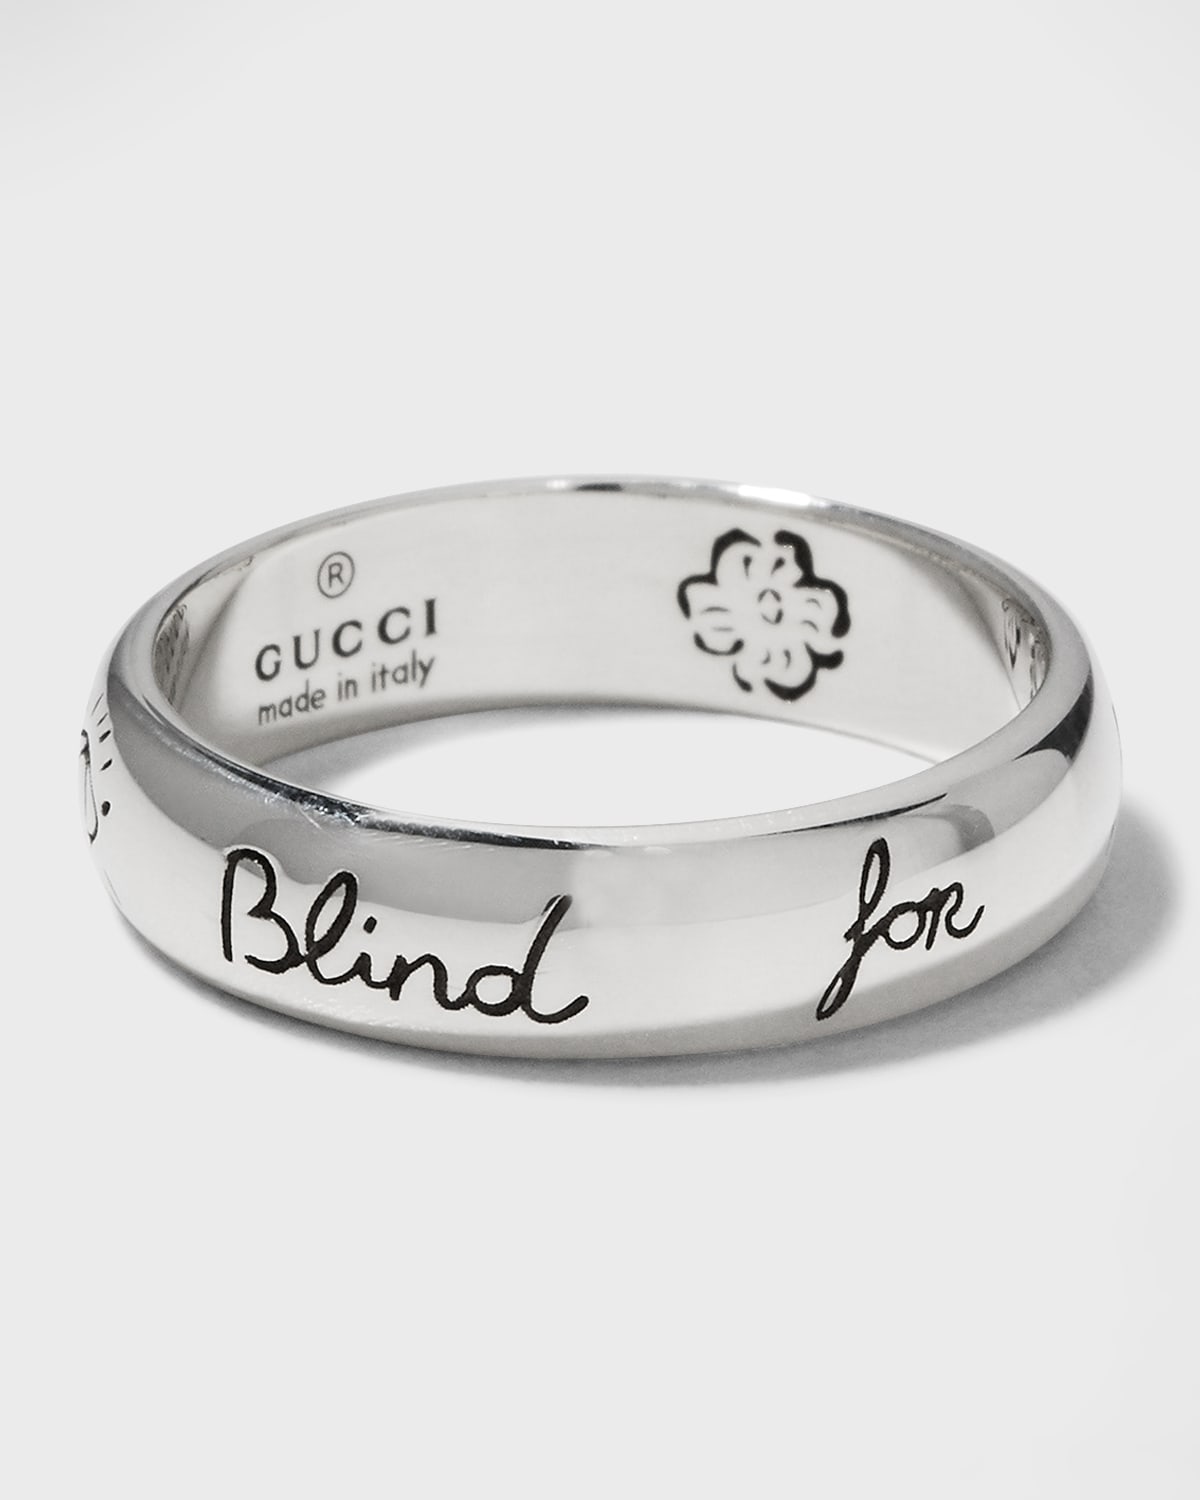 Blind for Love 5mm Sterling Silver Band Ring